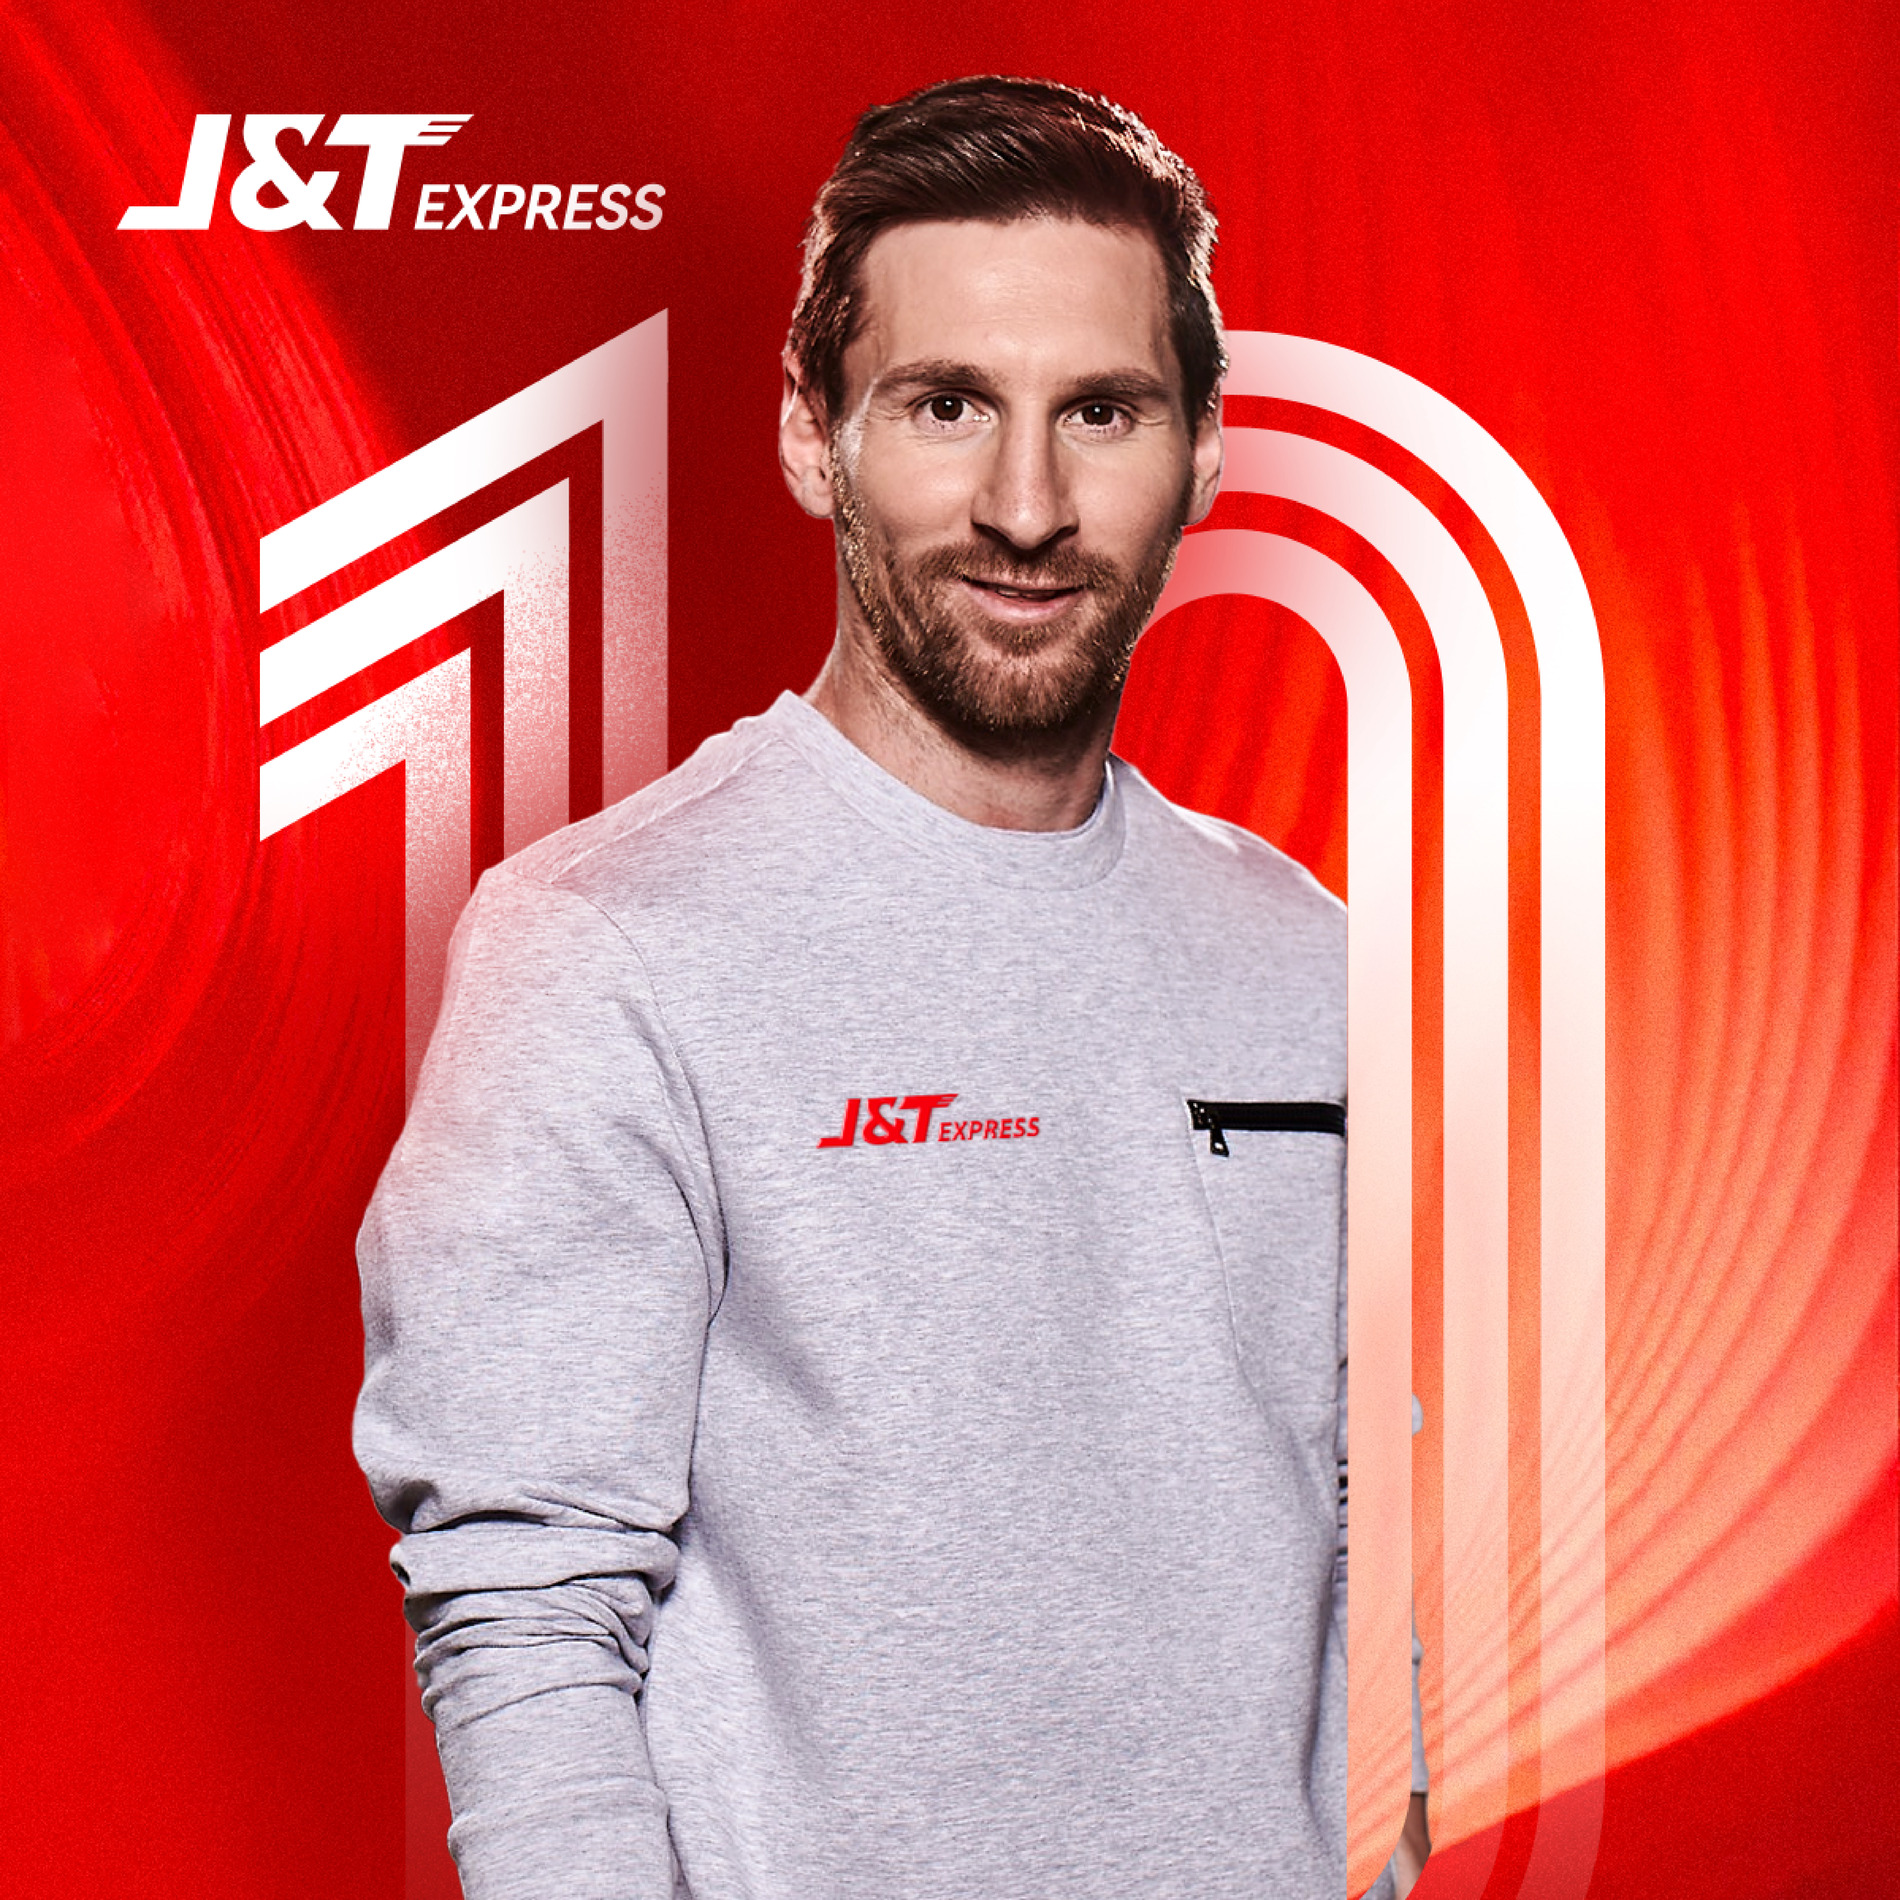 J&T Express Signs Lionel Messi As Its First Global Brand Ambassador -  Construction Business News Middle East